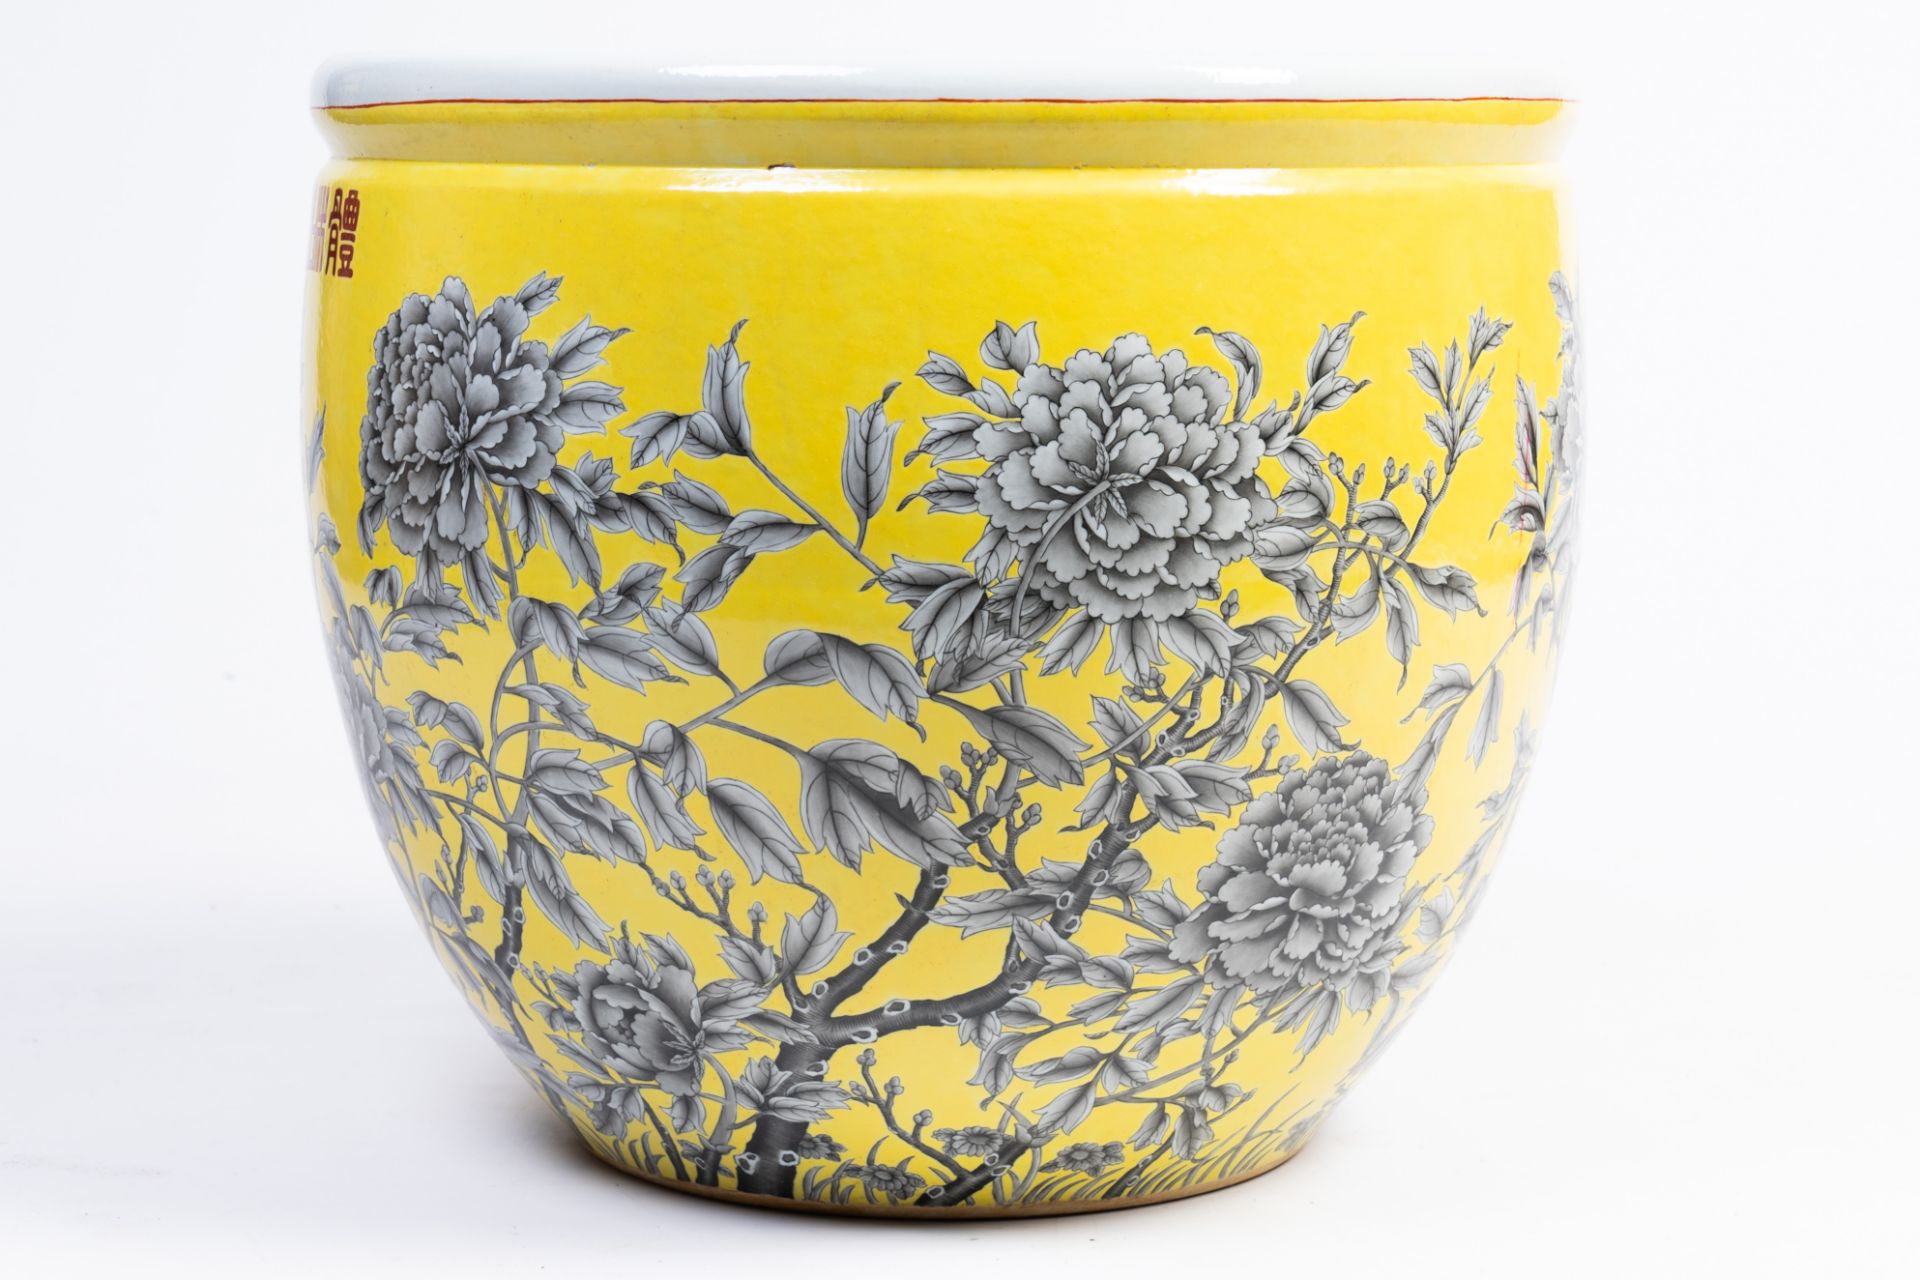 A large Chinese Dayazhai style jardiniere with floral design on a yellow ground, 19th/20th C. - Image 10 of 14